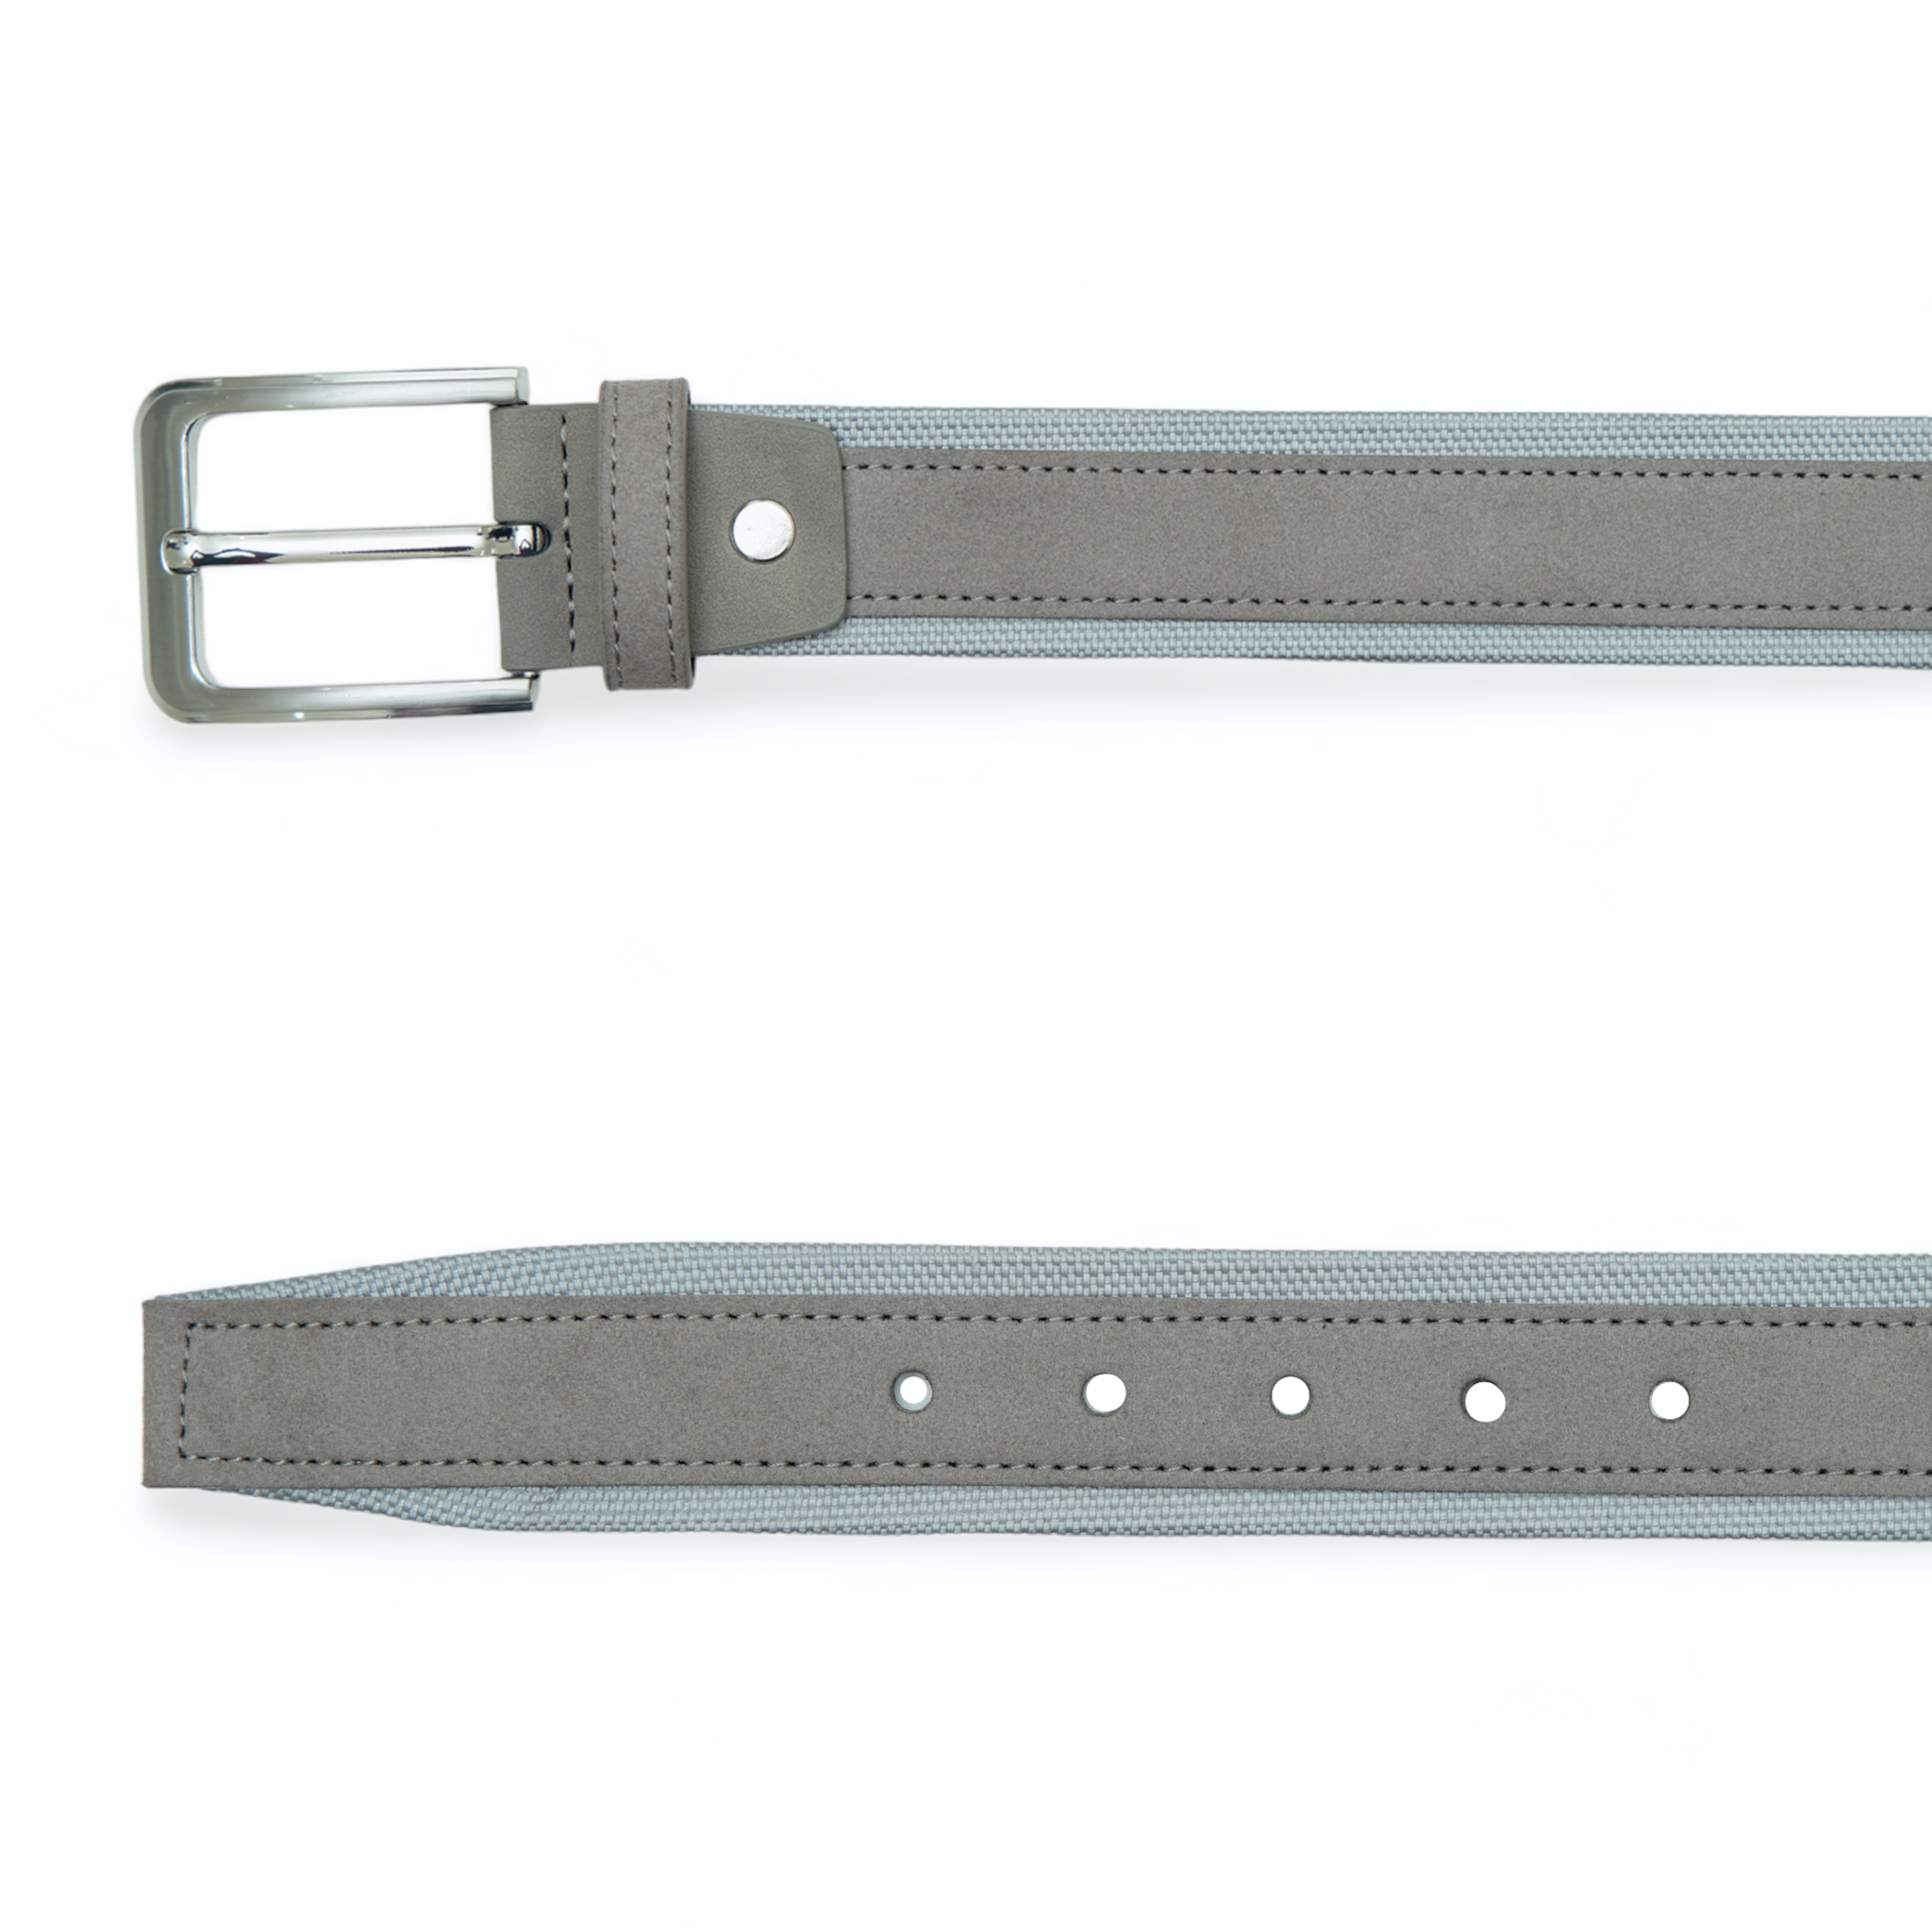 Chokore Suede Leather Belt with Canvas Detailing (Gray)